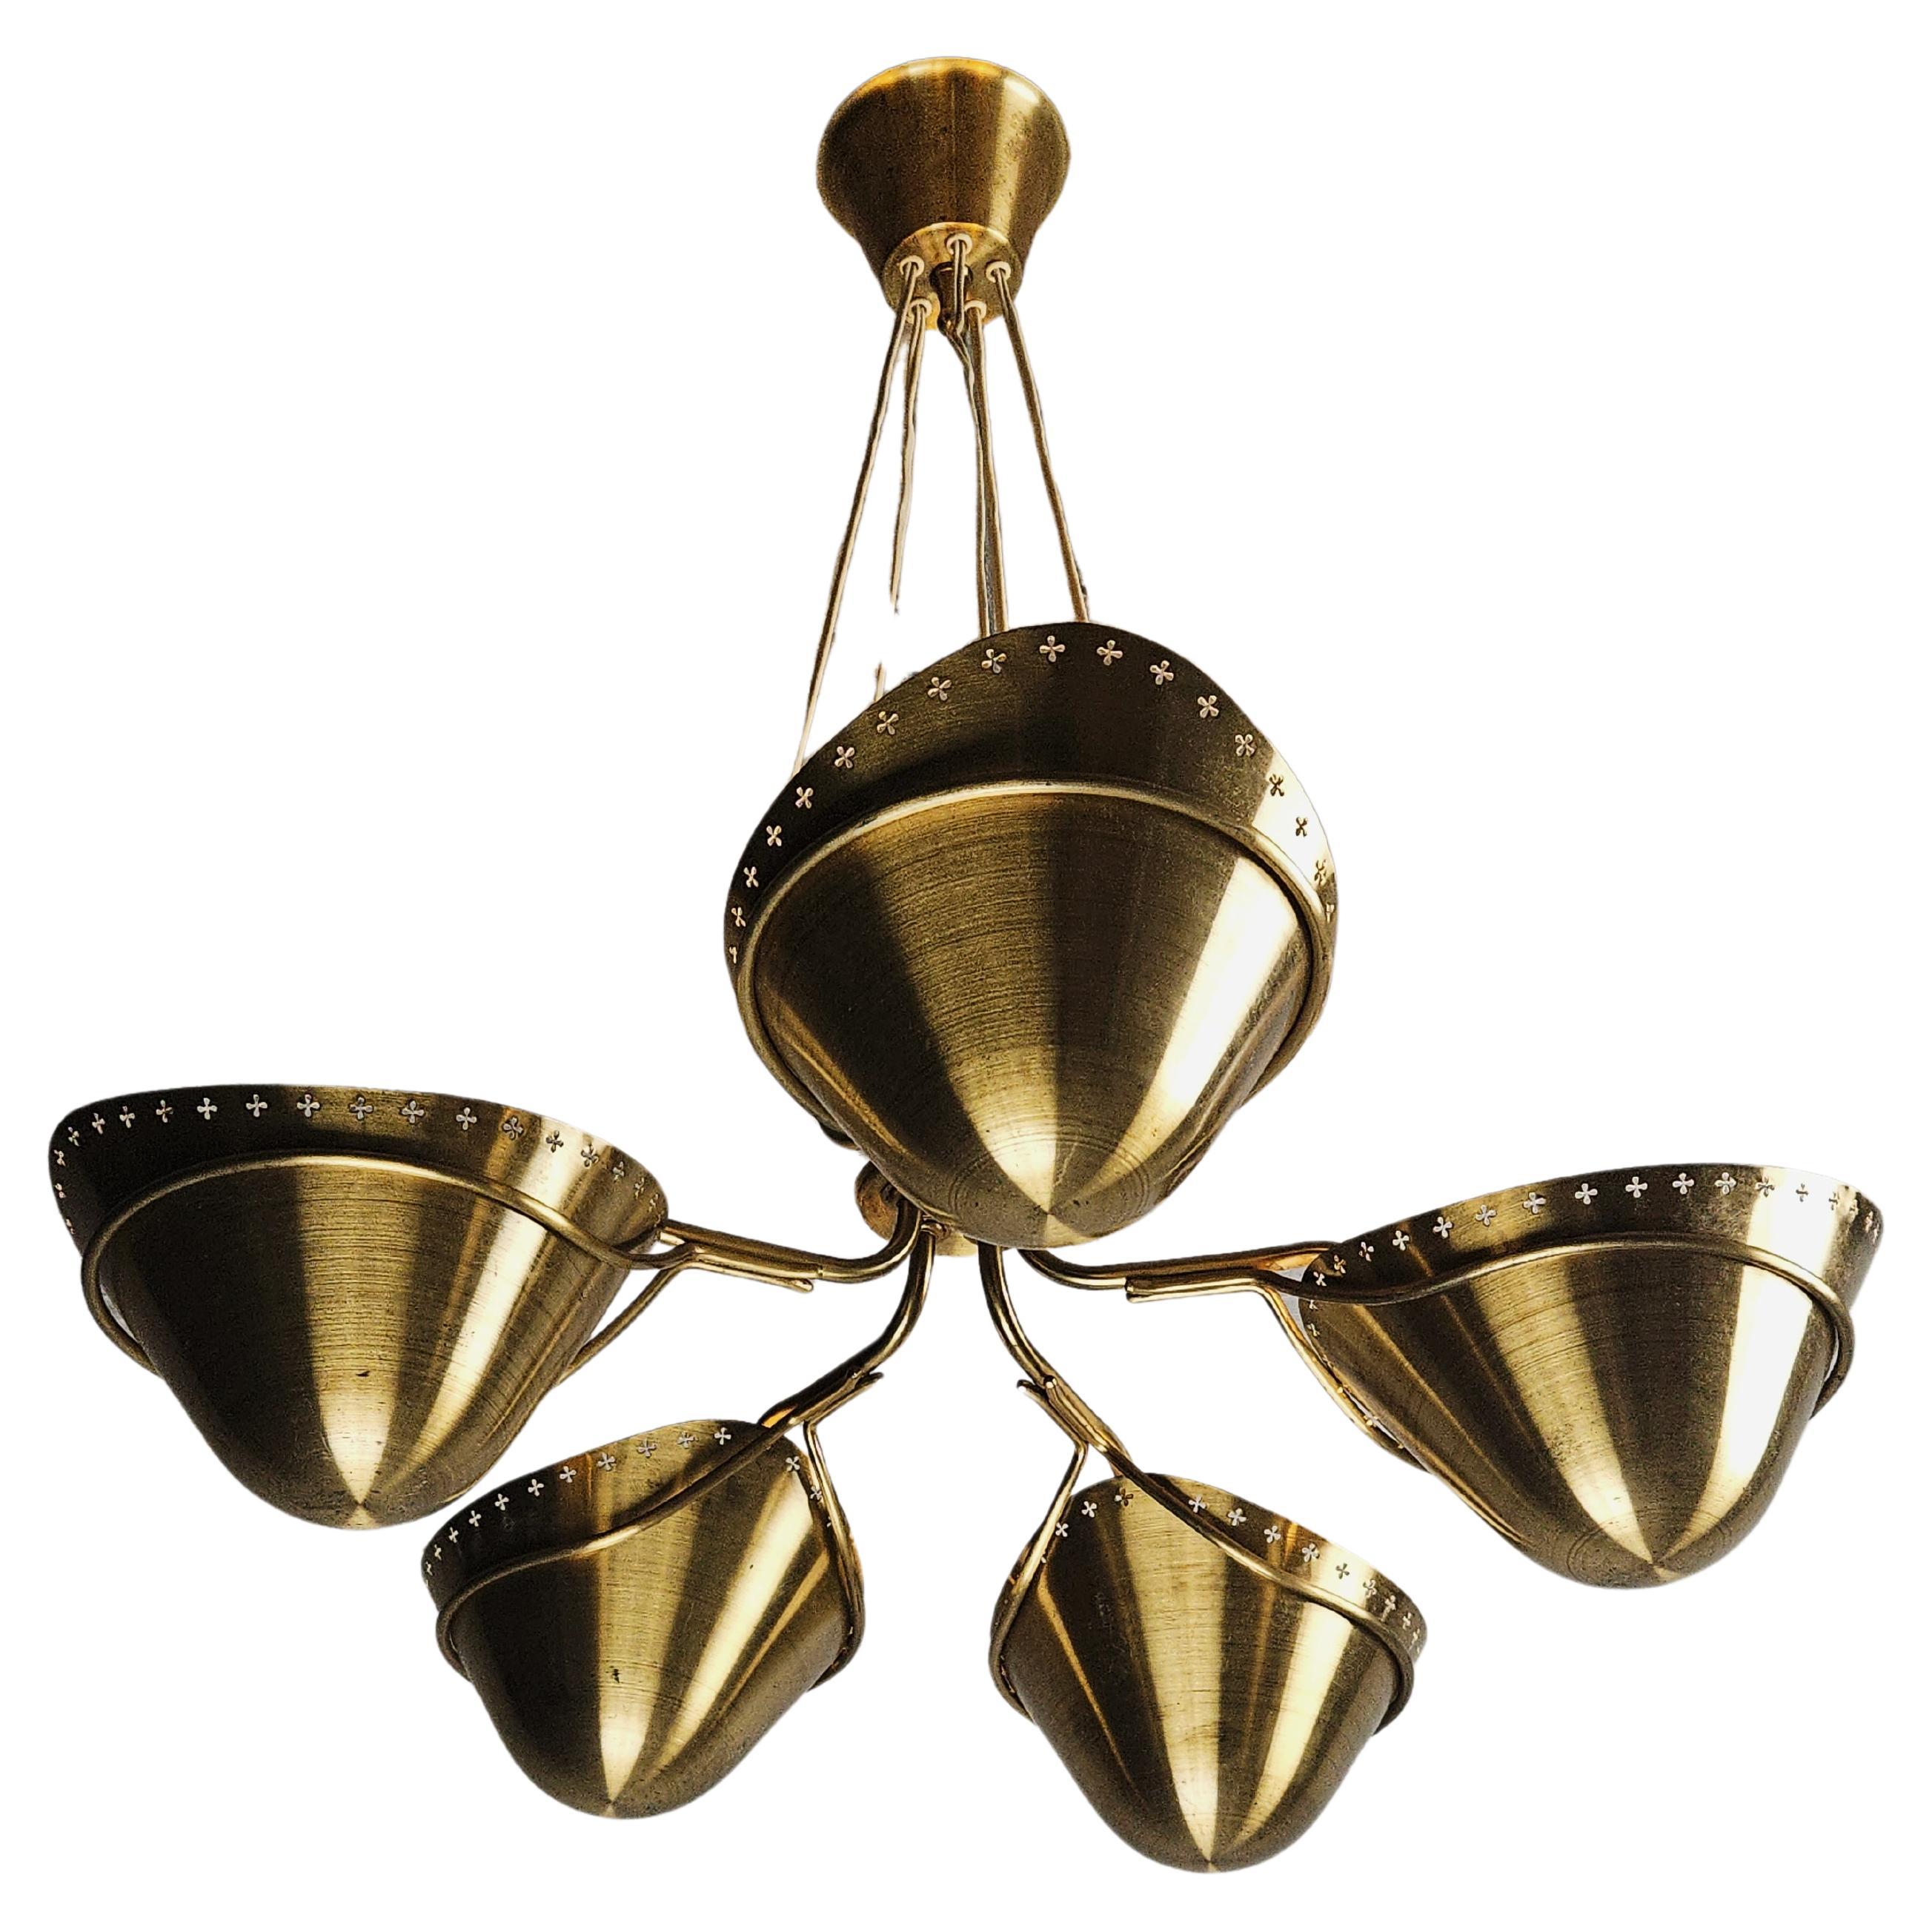 Extremely rare Swedish Modern brass ceiling lamp, 1940s-50s